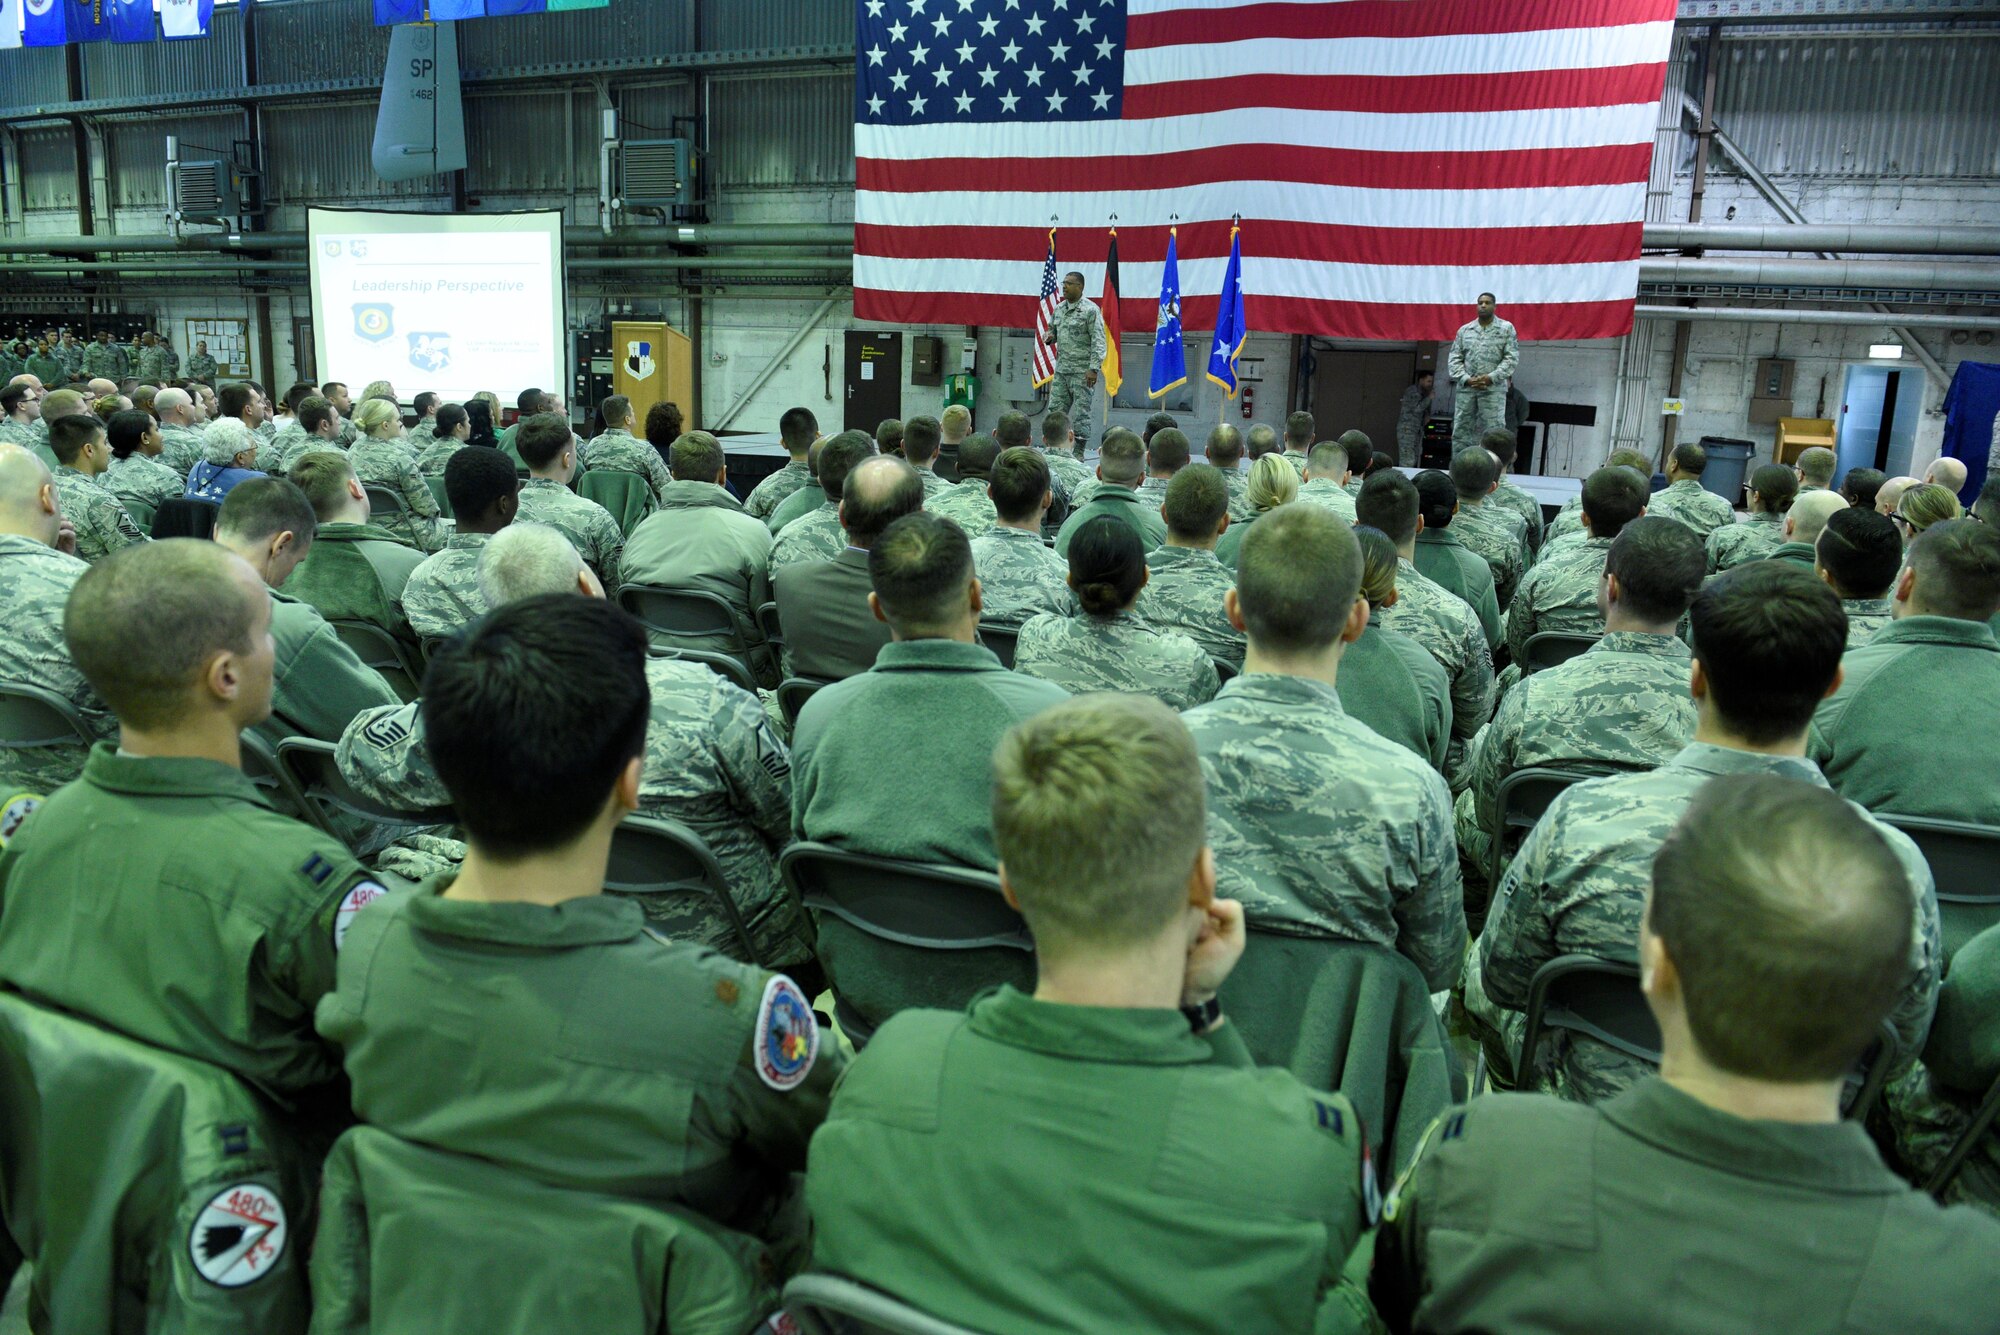 Lt. Gen. Richard Clark, 3rd Air Force and 17th Expeditionary Air Force commander, talks about his priorities during an all call at Hangar One on Spangdahlem Air Base, Germany, Dec. 14, 2016. This visit represented his first time at Spangdahlem Air Base since assuming command in October 2016. (U.S. Air Force photo by Staff Sgt. Jonathan Snyder)